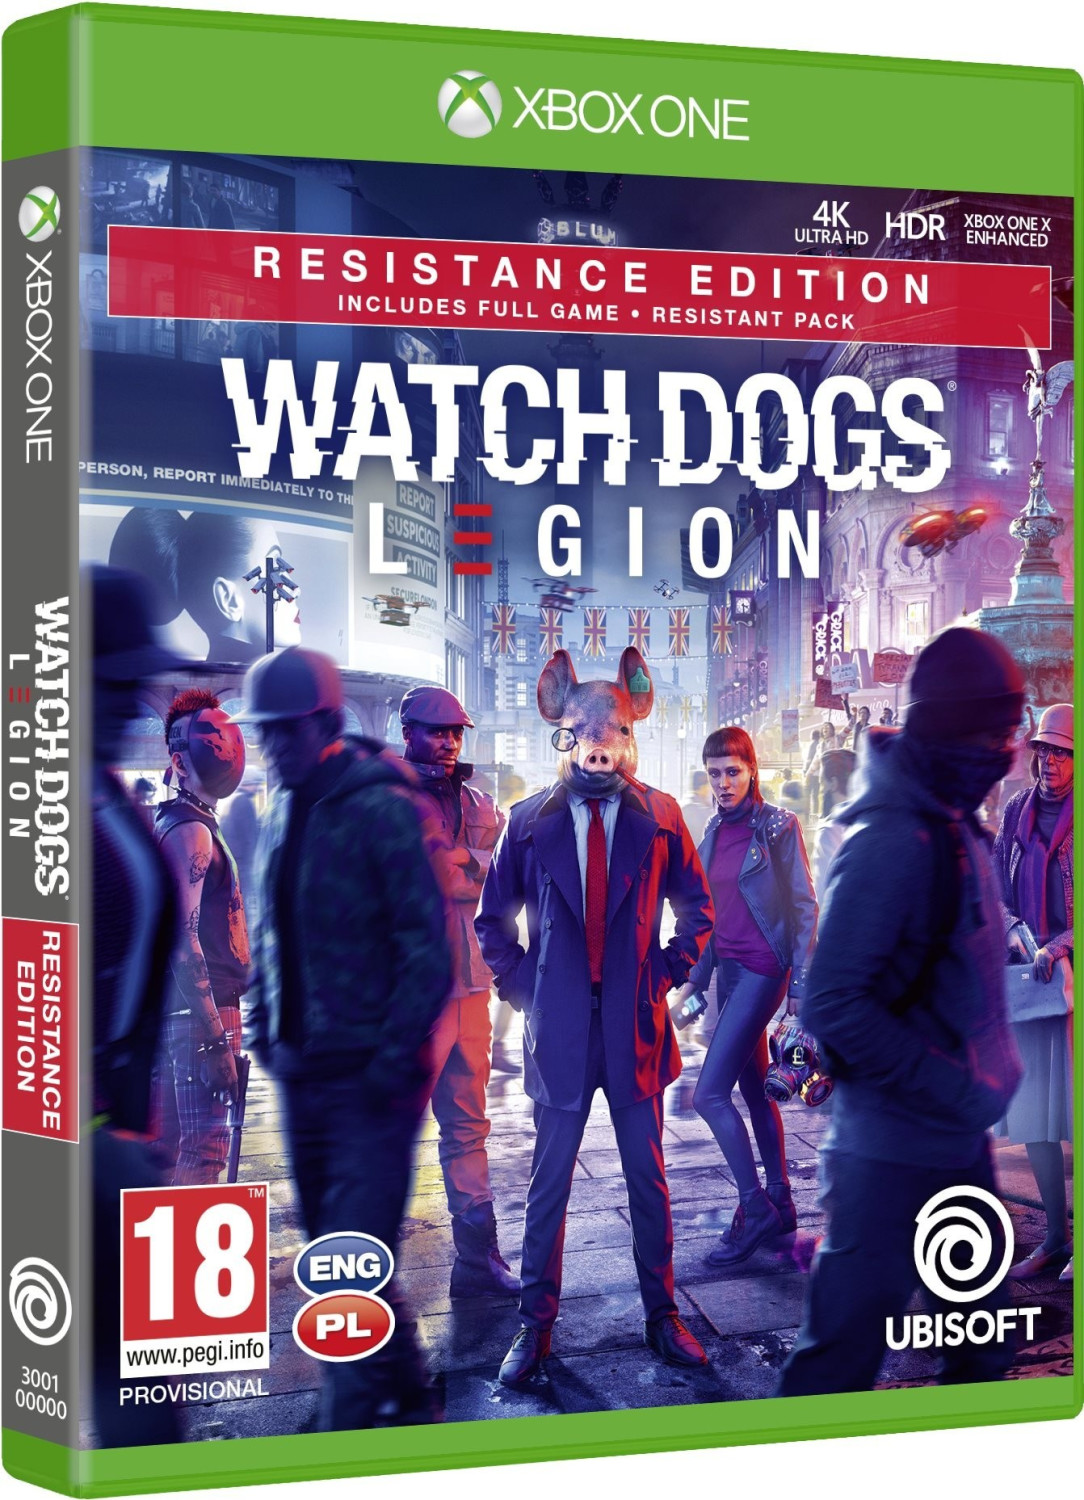 Photos - Game Ubisoft Watch Dogs: Legion - Resistance Edition  (Xbox One)